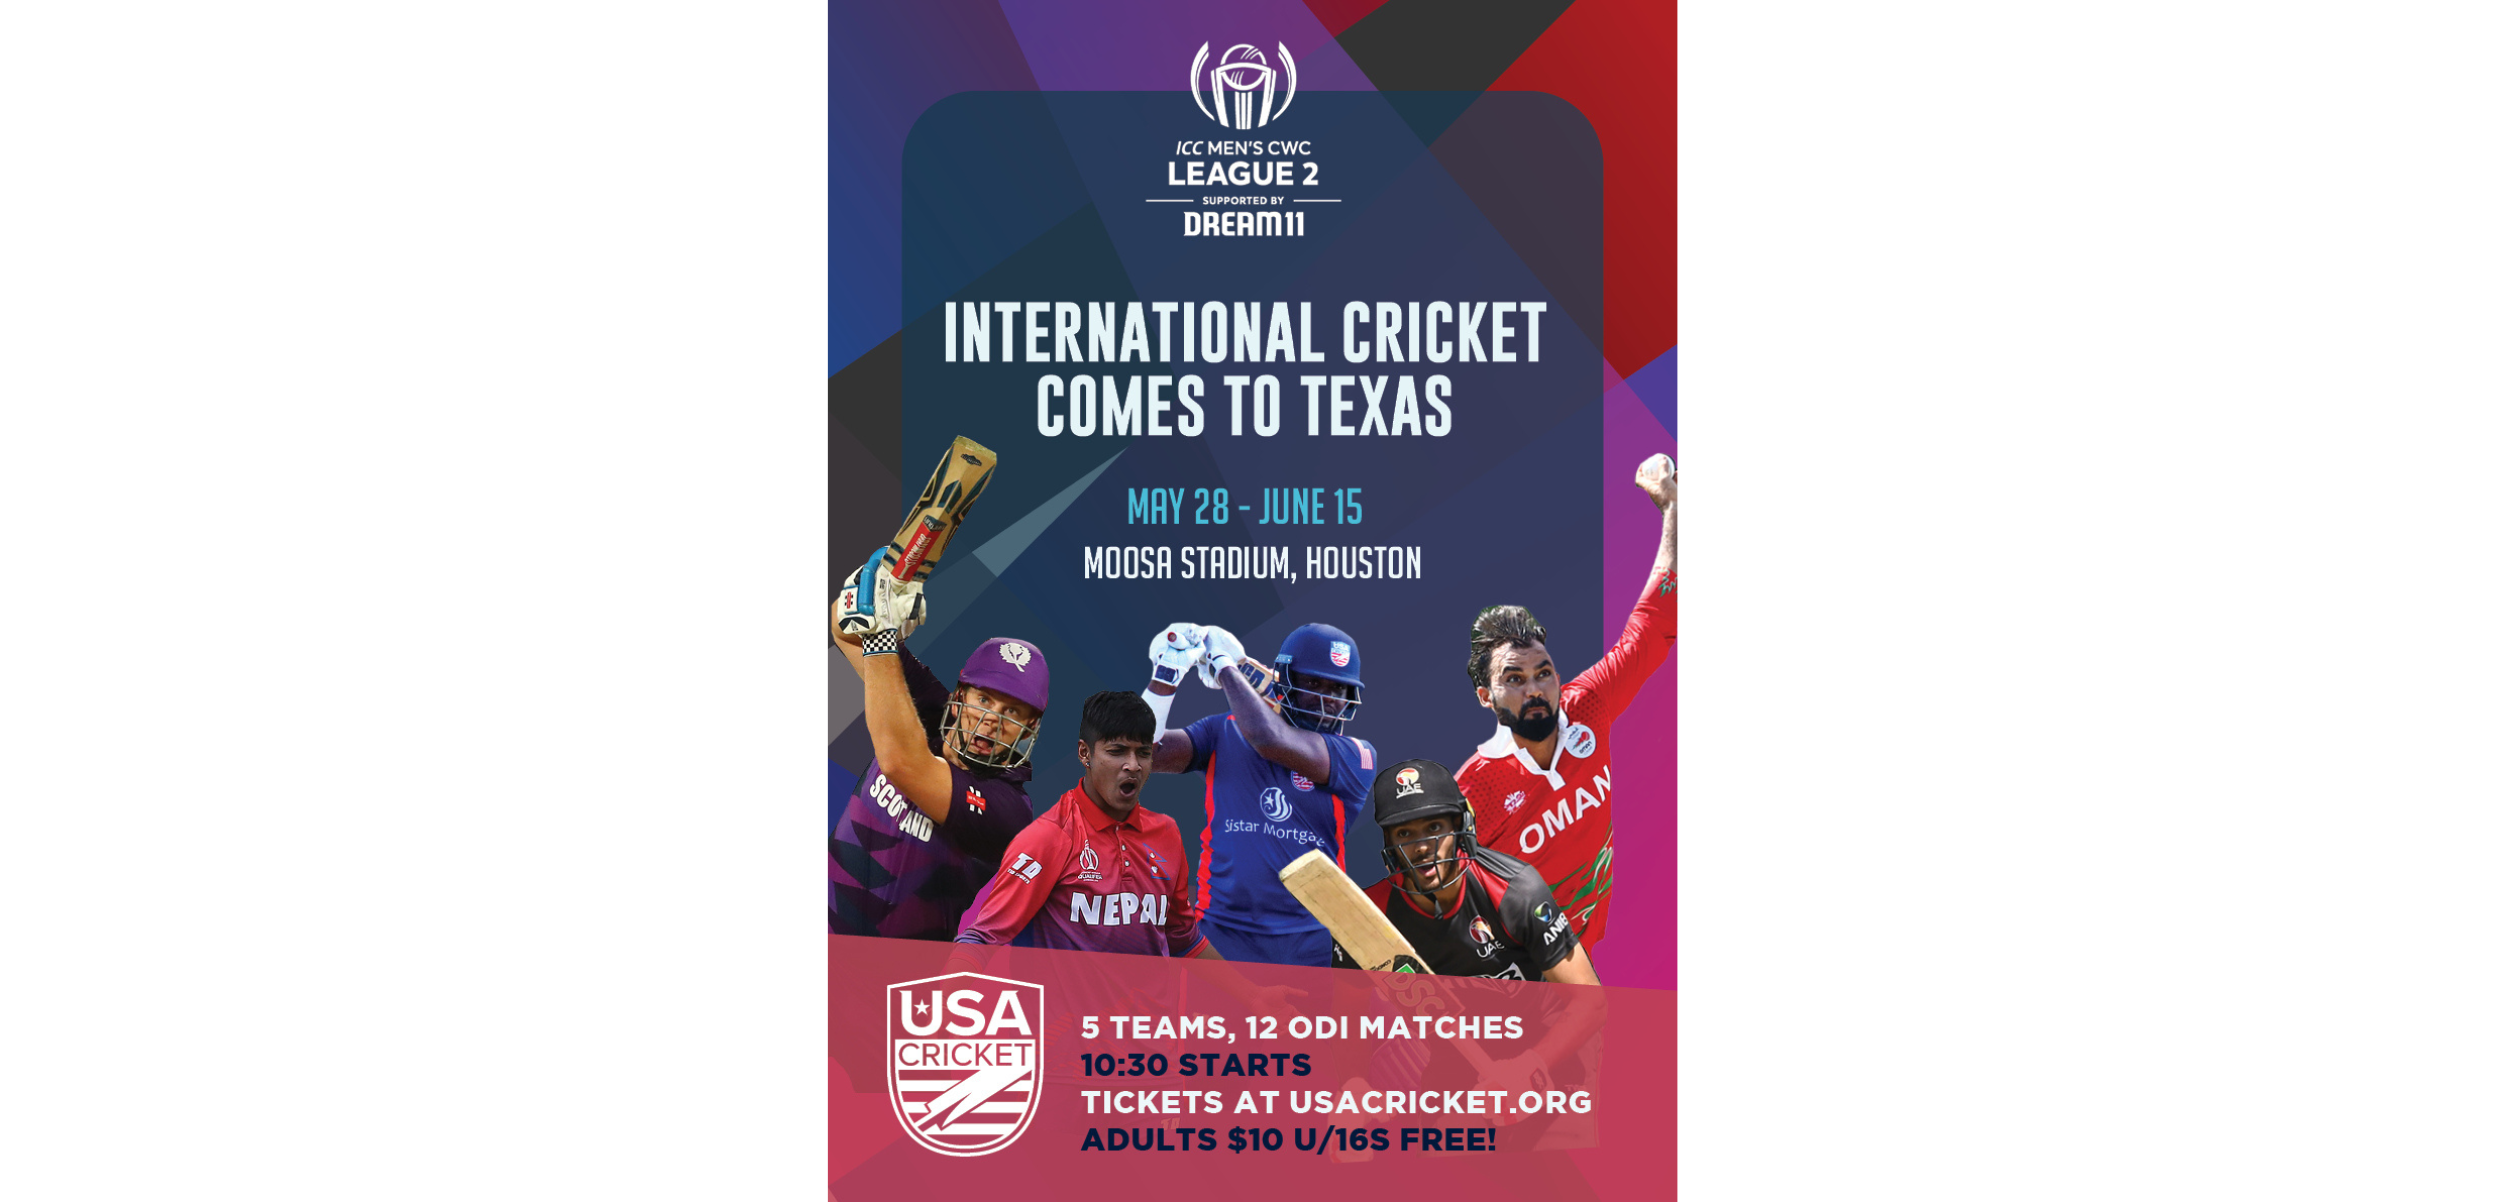 USA Cricket: Team USA Men’s squad named for home ICC Cricket World Cup League 2 series